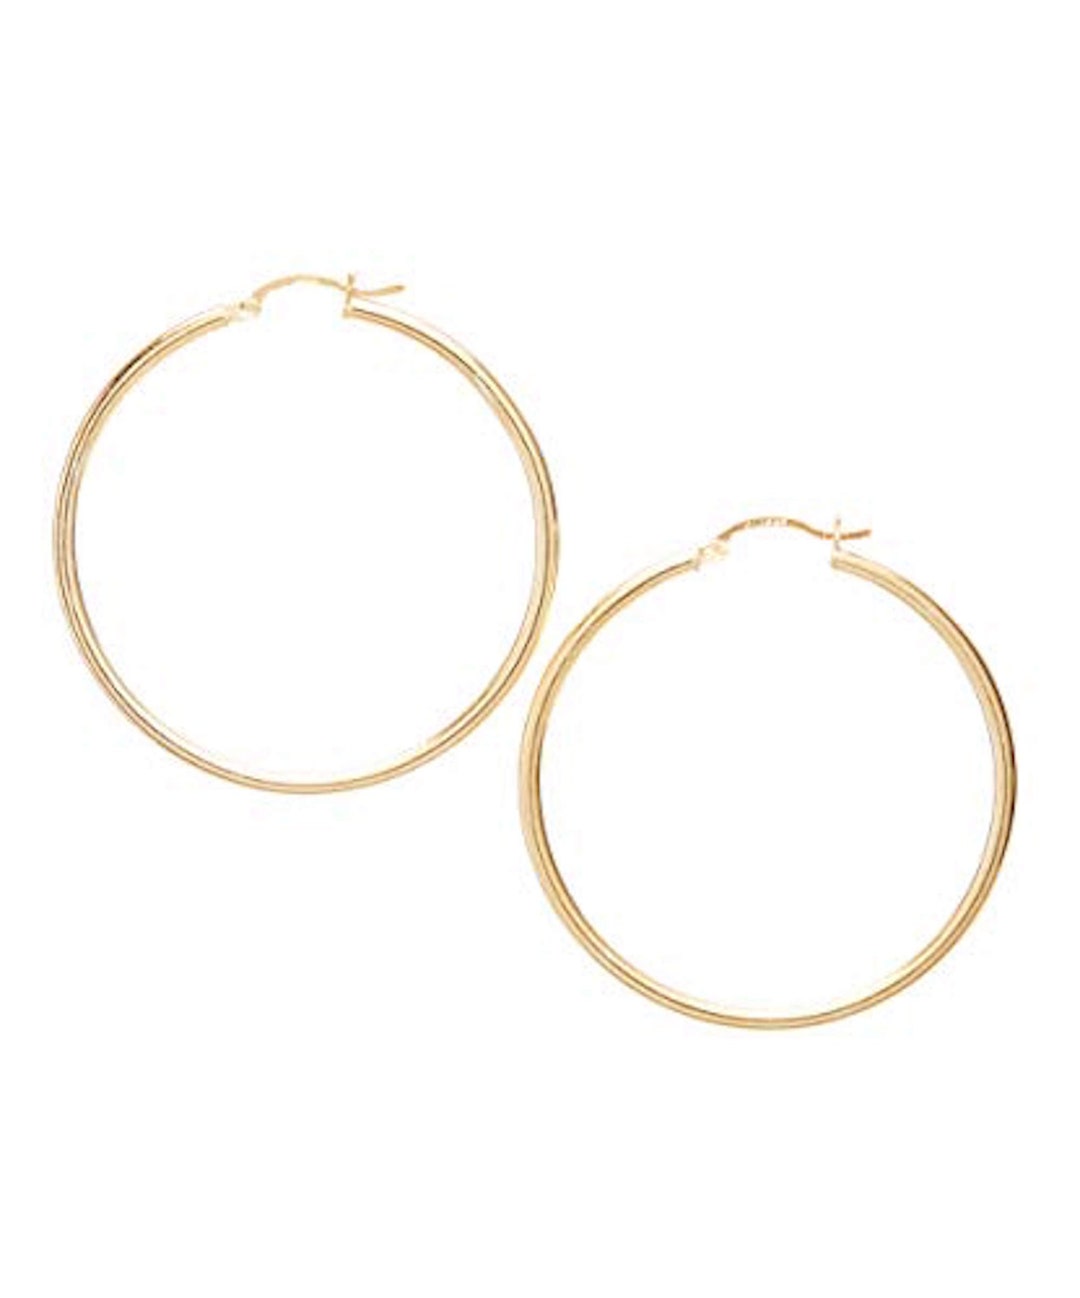 14K Solid Yellow Gold Shiny Polished Round Hoop Earrings for - Etsy